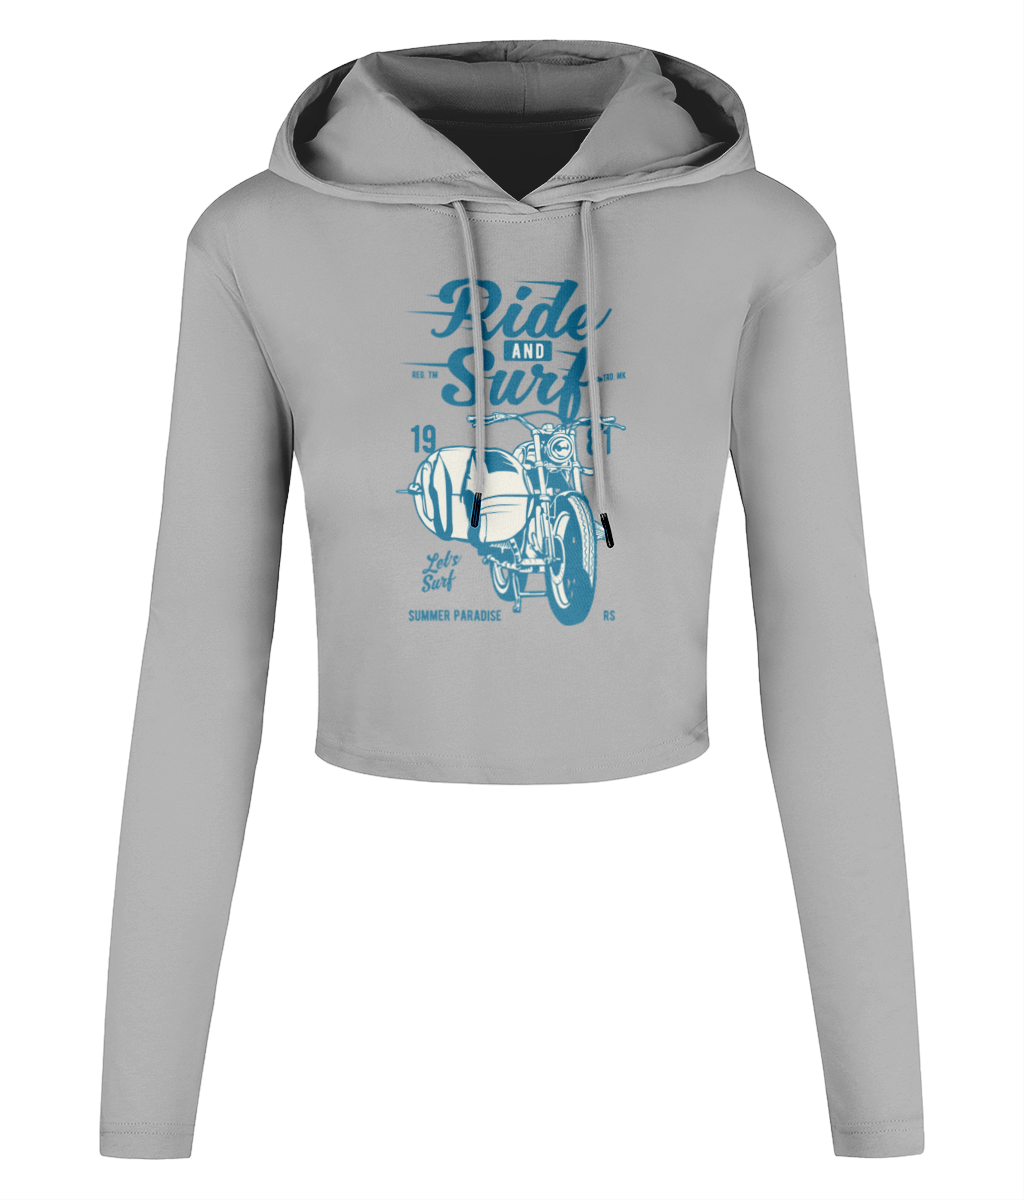 Ride And Surf – Women’s Cropped Hooded T-shirt